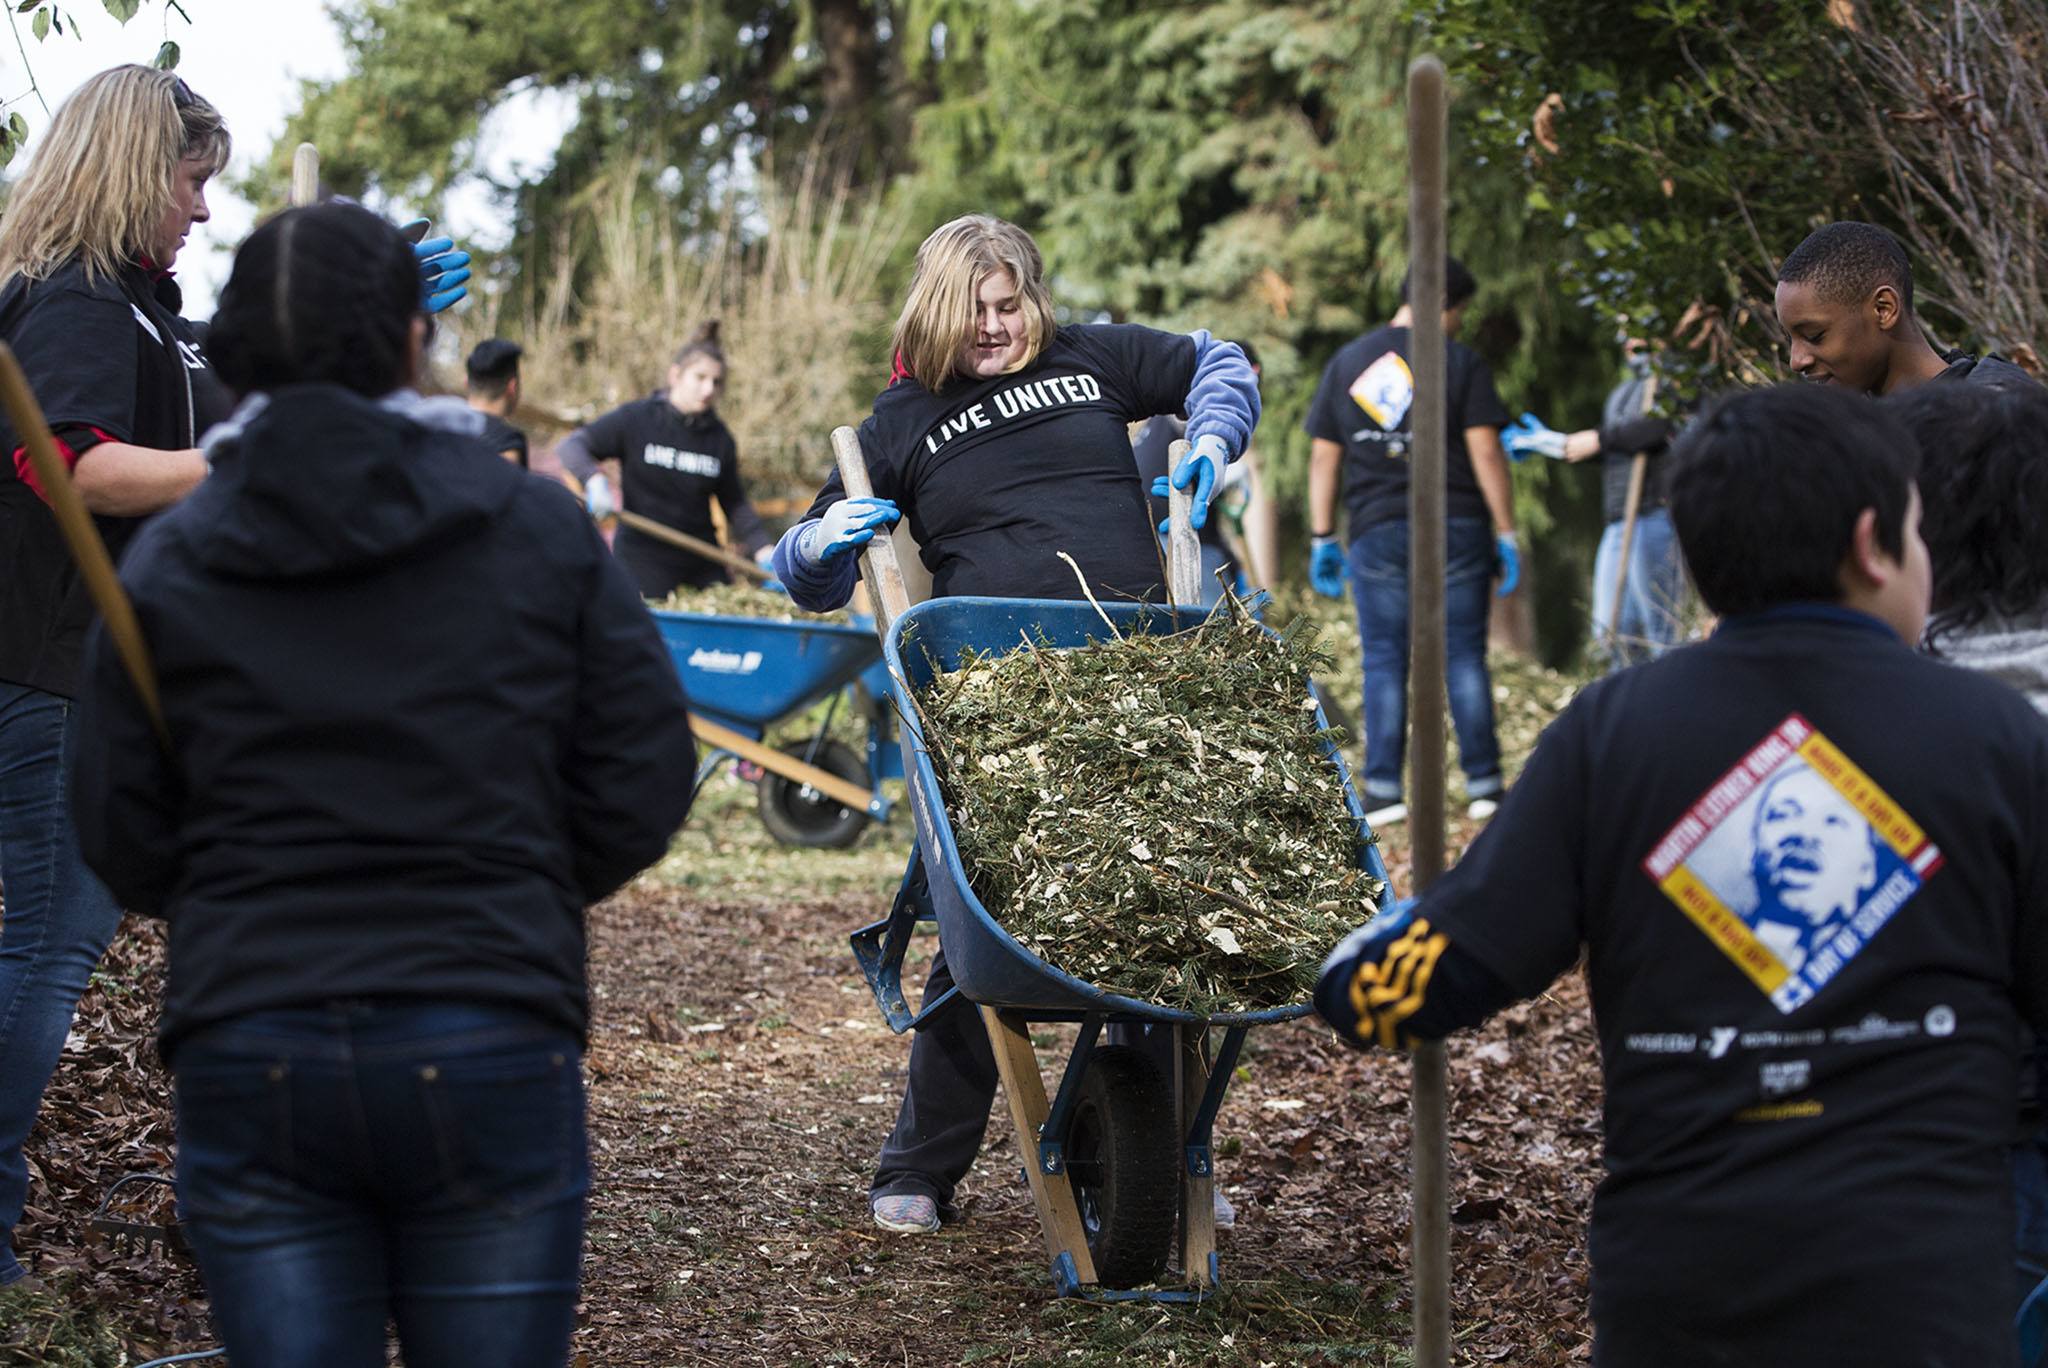 Elsa DeGraw, 12, attempts to control a mulch-filled wheelbarrow during a volunteer service day in recognition of MLK Day at Jennings Park on Monday in Marysville. DeGraw and other volunteers from the YMCA My Achiever Program worked alongside adult mentors to cover trails at the park. (Daniella Beccaria / The Herald)